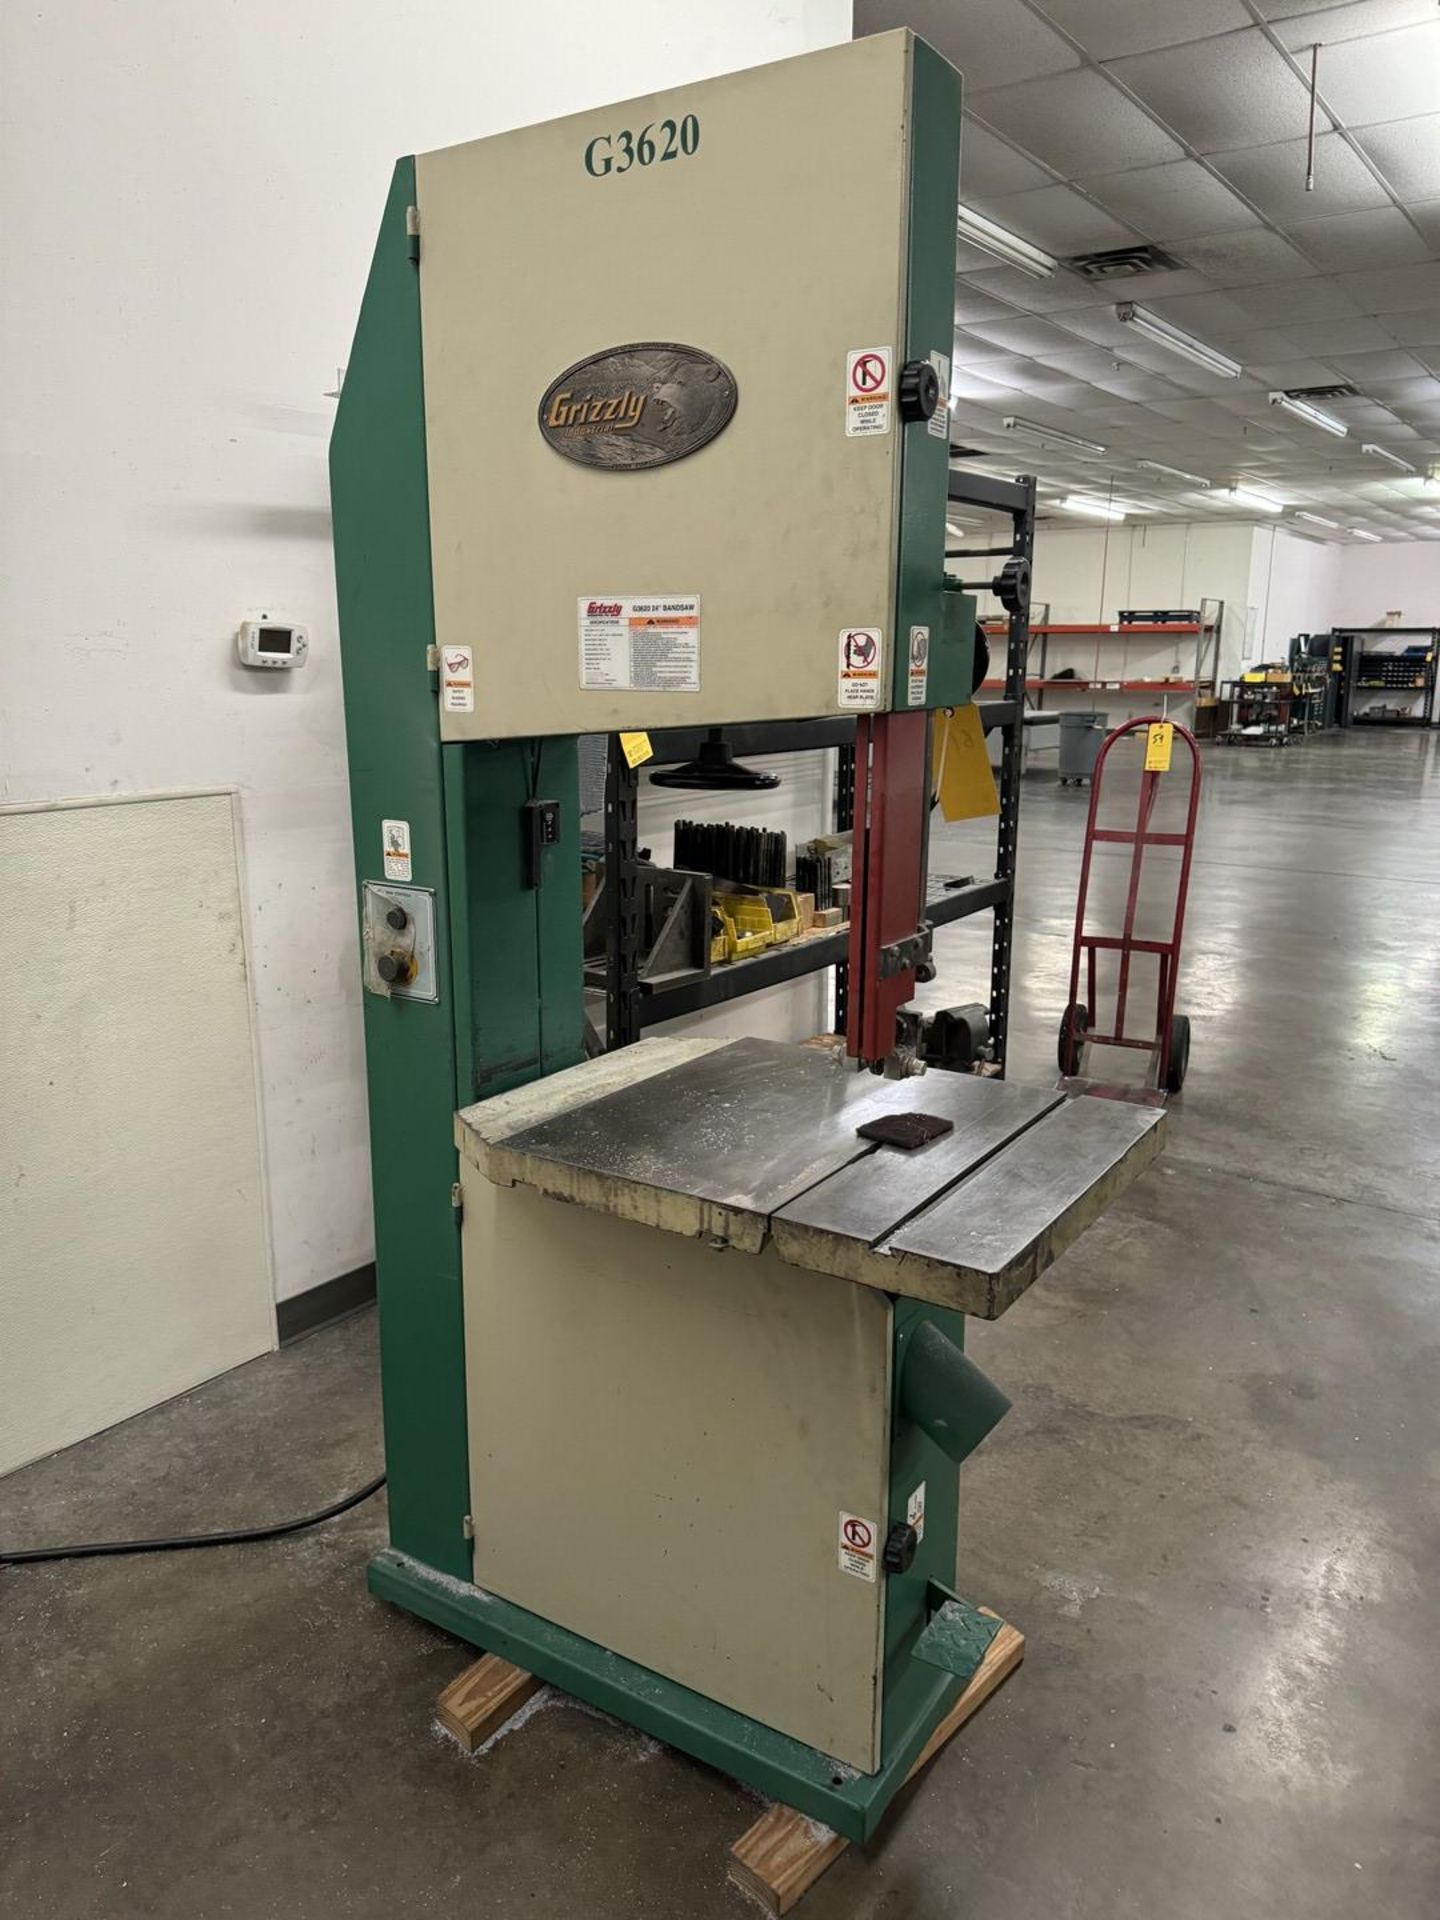 Grizzly Industrial G3620 24” Bandsaw - Image 2 of 2